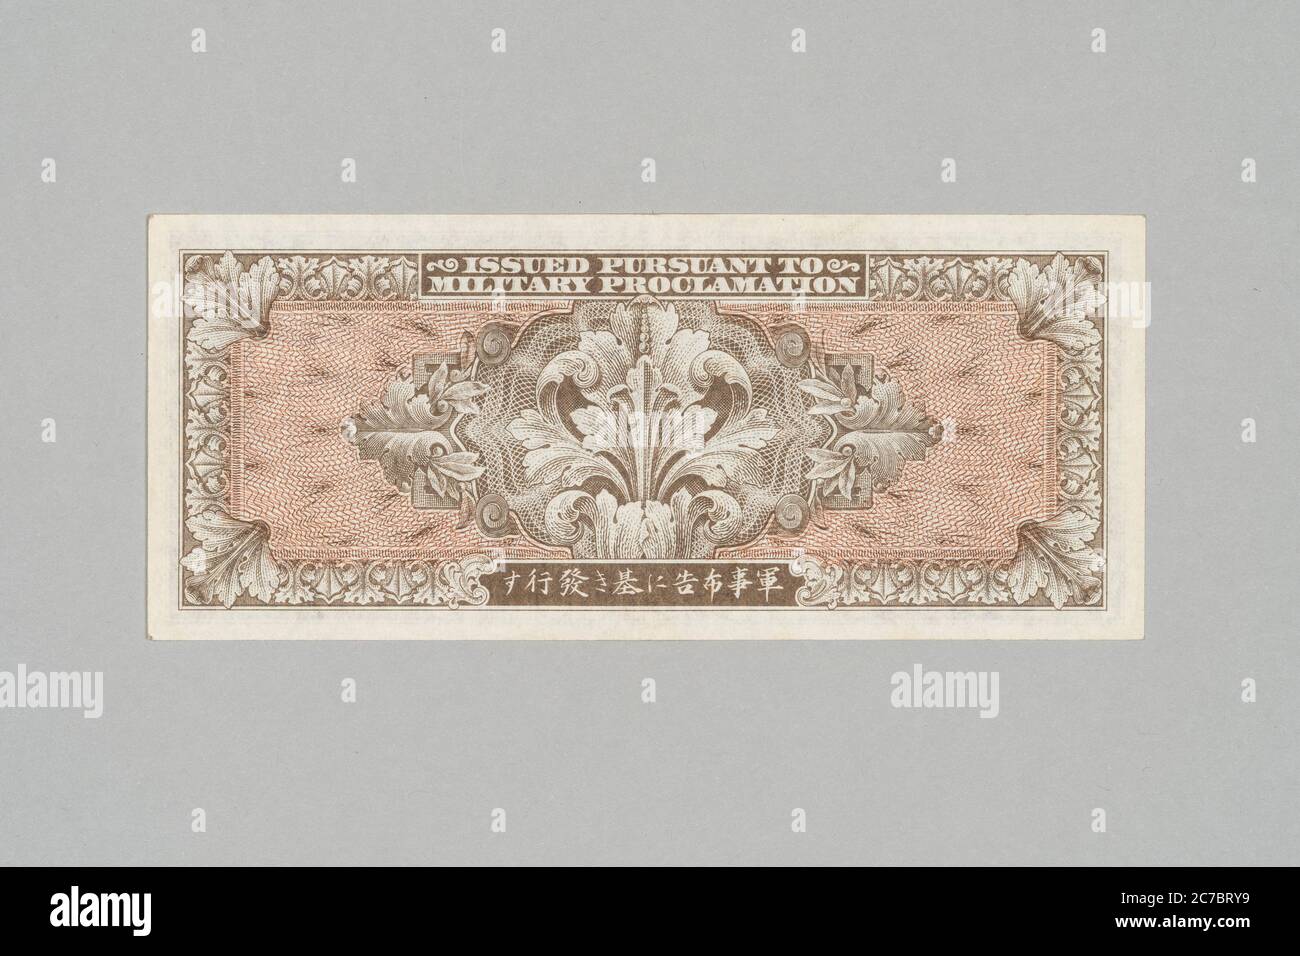 Backside of B yen (B type military scrip) . These were issued in Okinawa and Amami islands, Kagoshima, Japan between ( 1945–1958 )  under occupation by US forces after WW2. Private Collection. Stock Photo